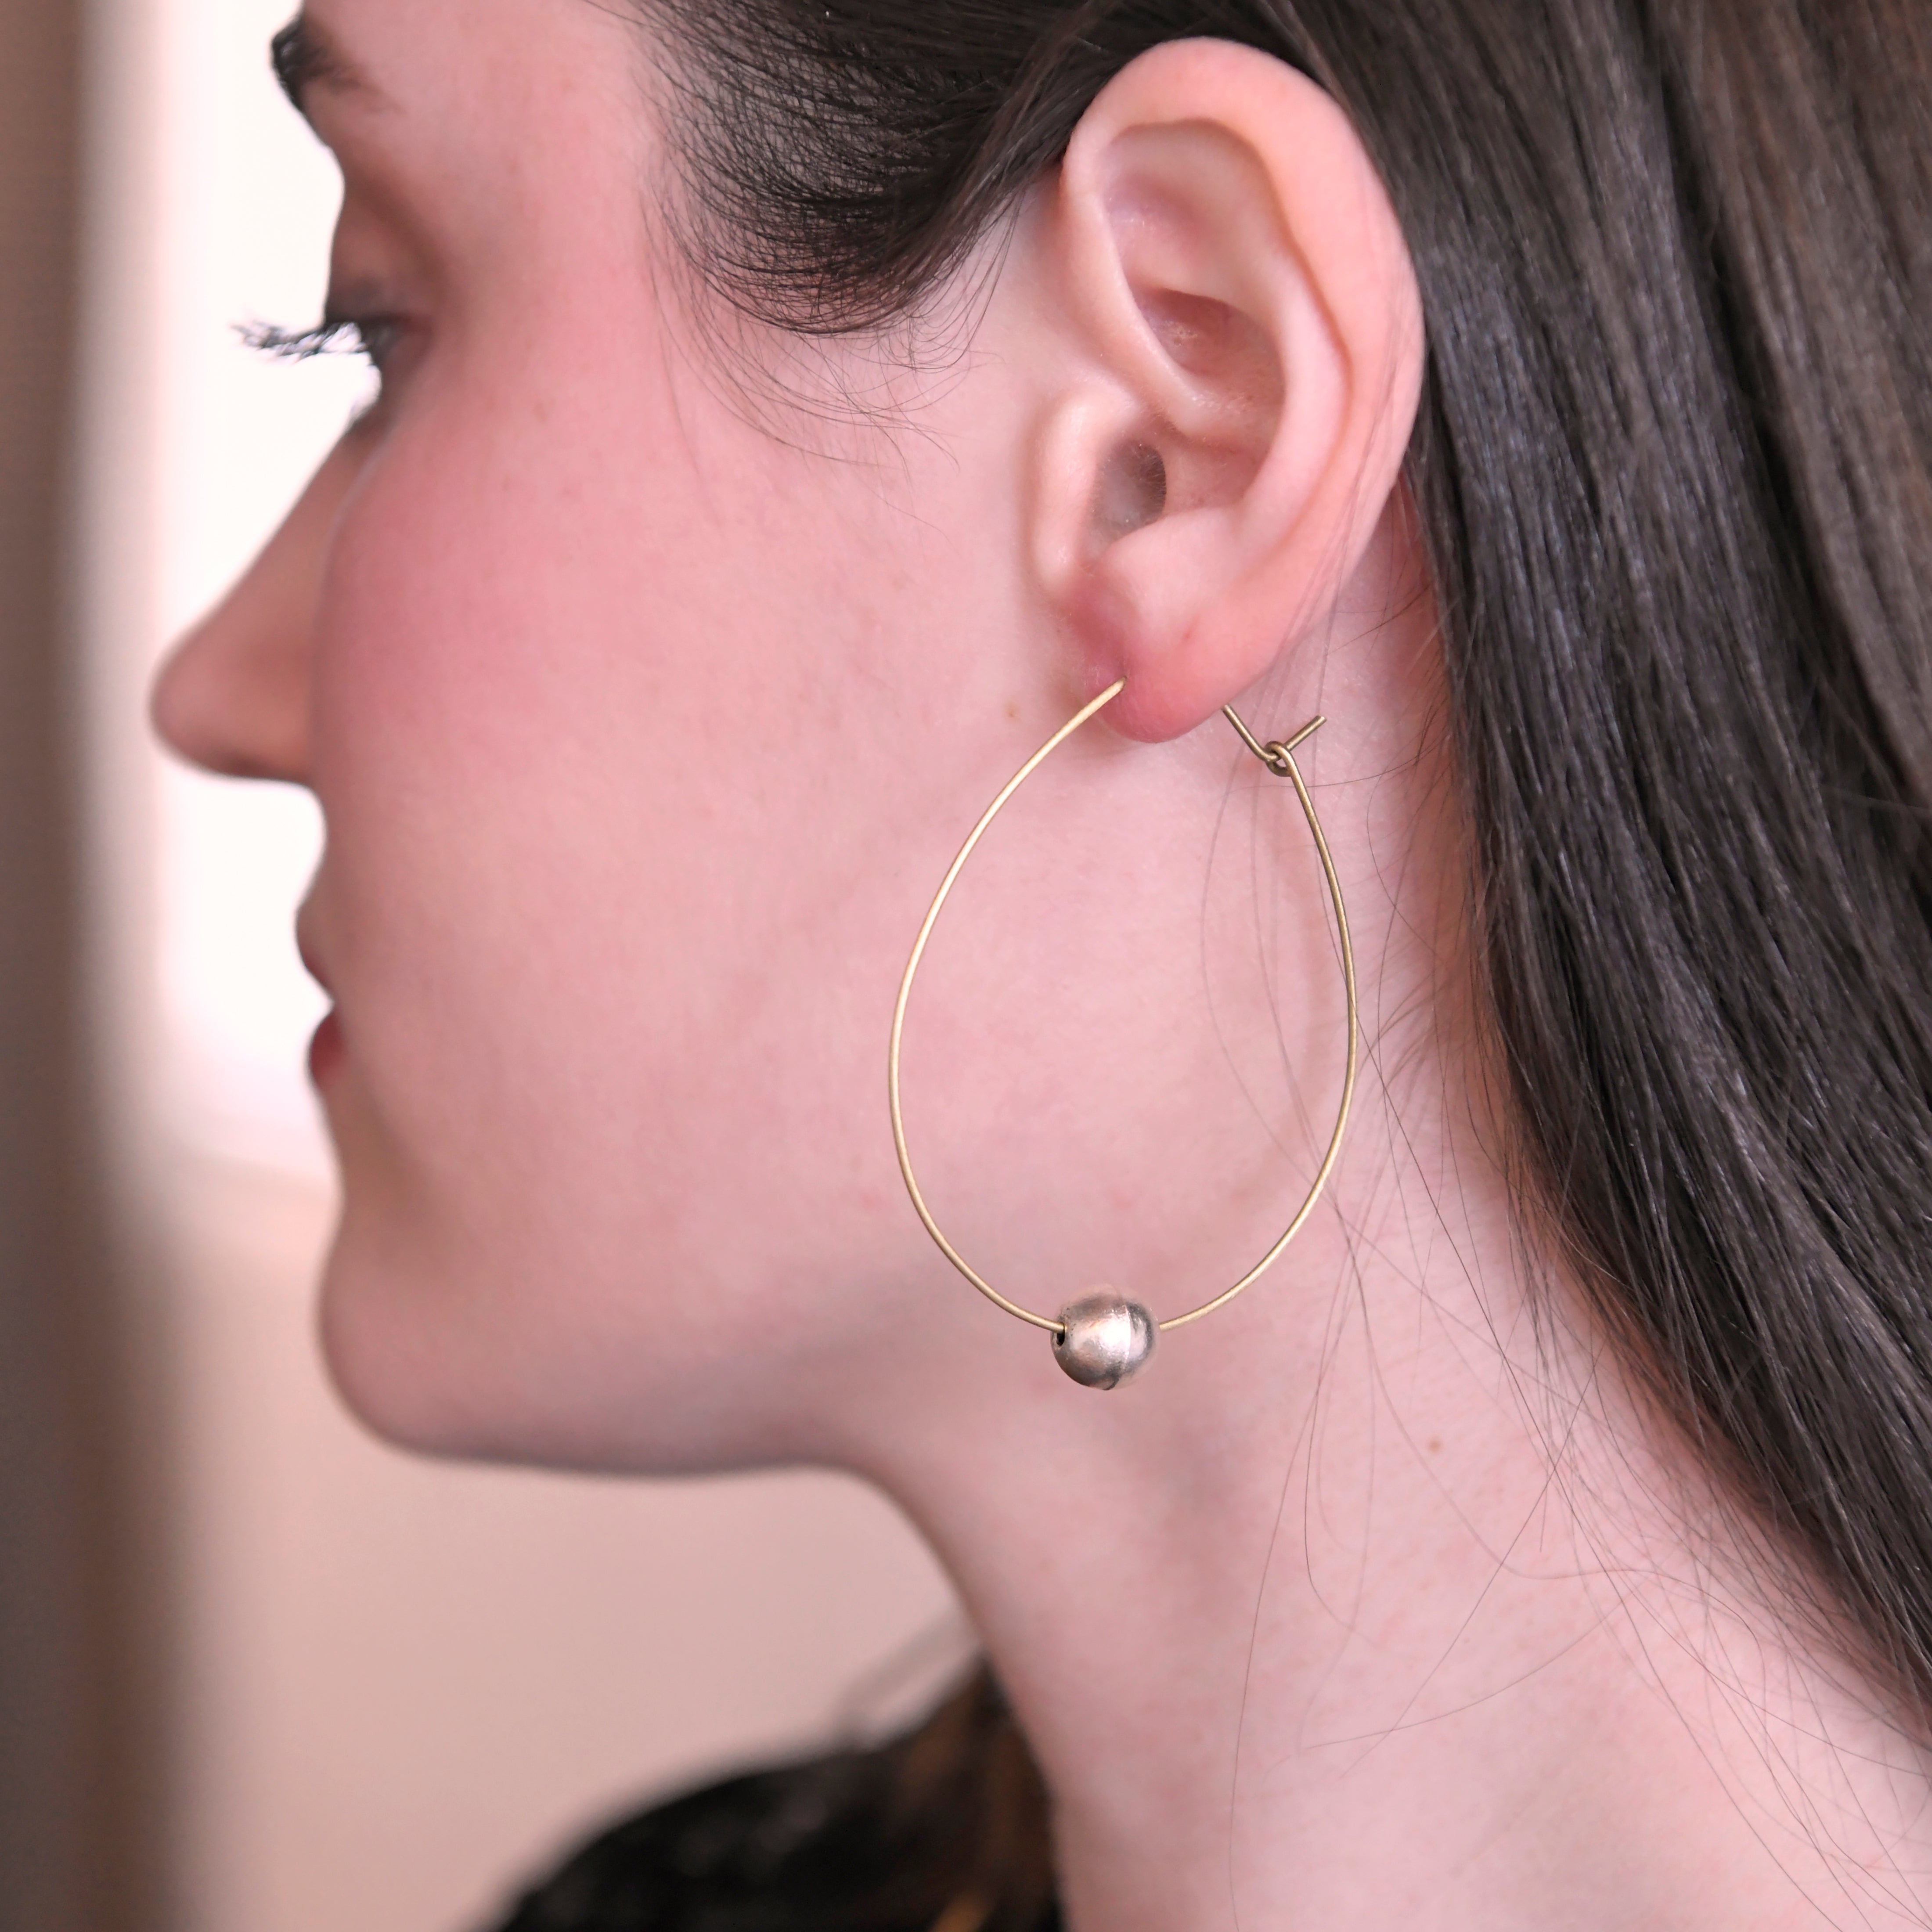 A woman models the Ethereal Bead Hoops.